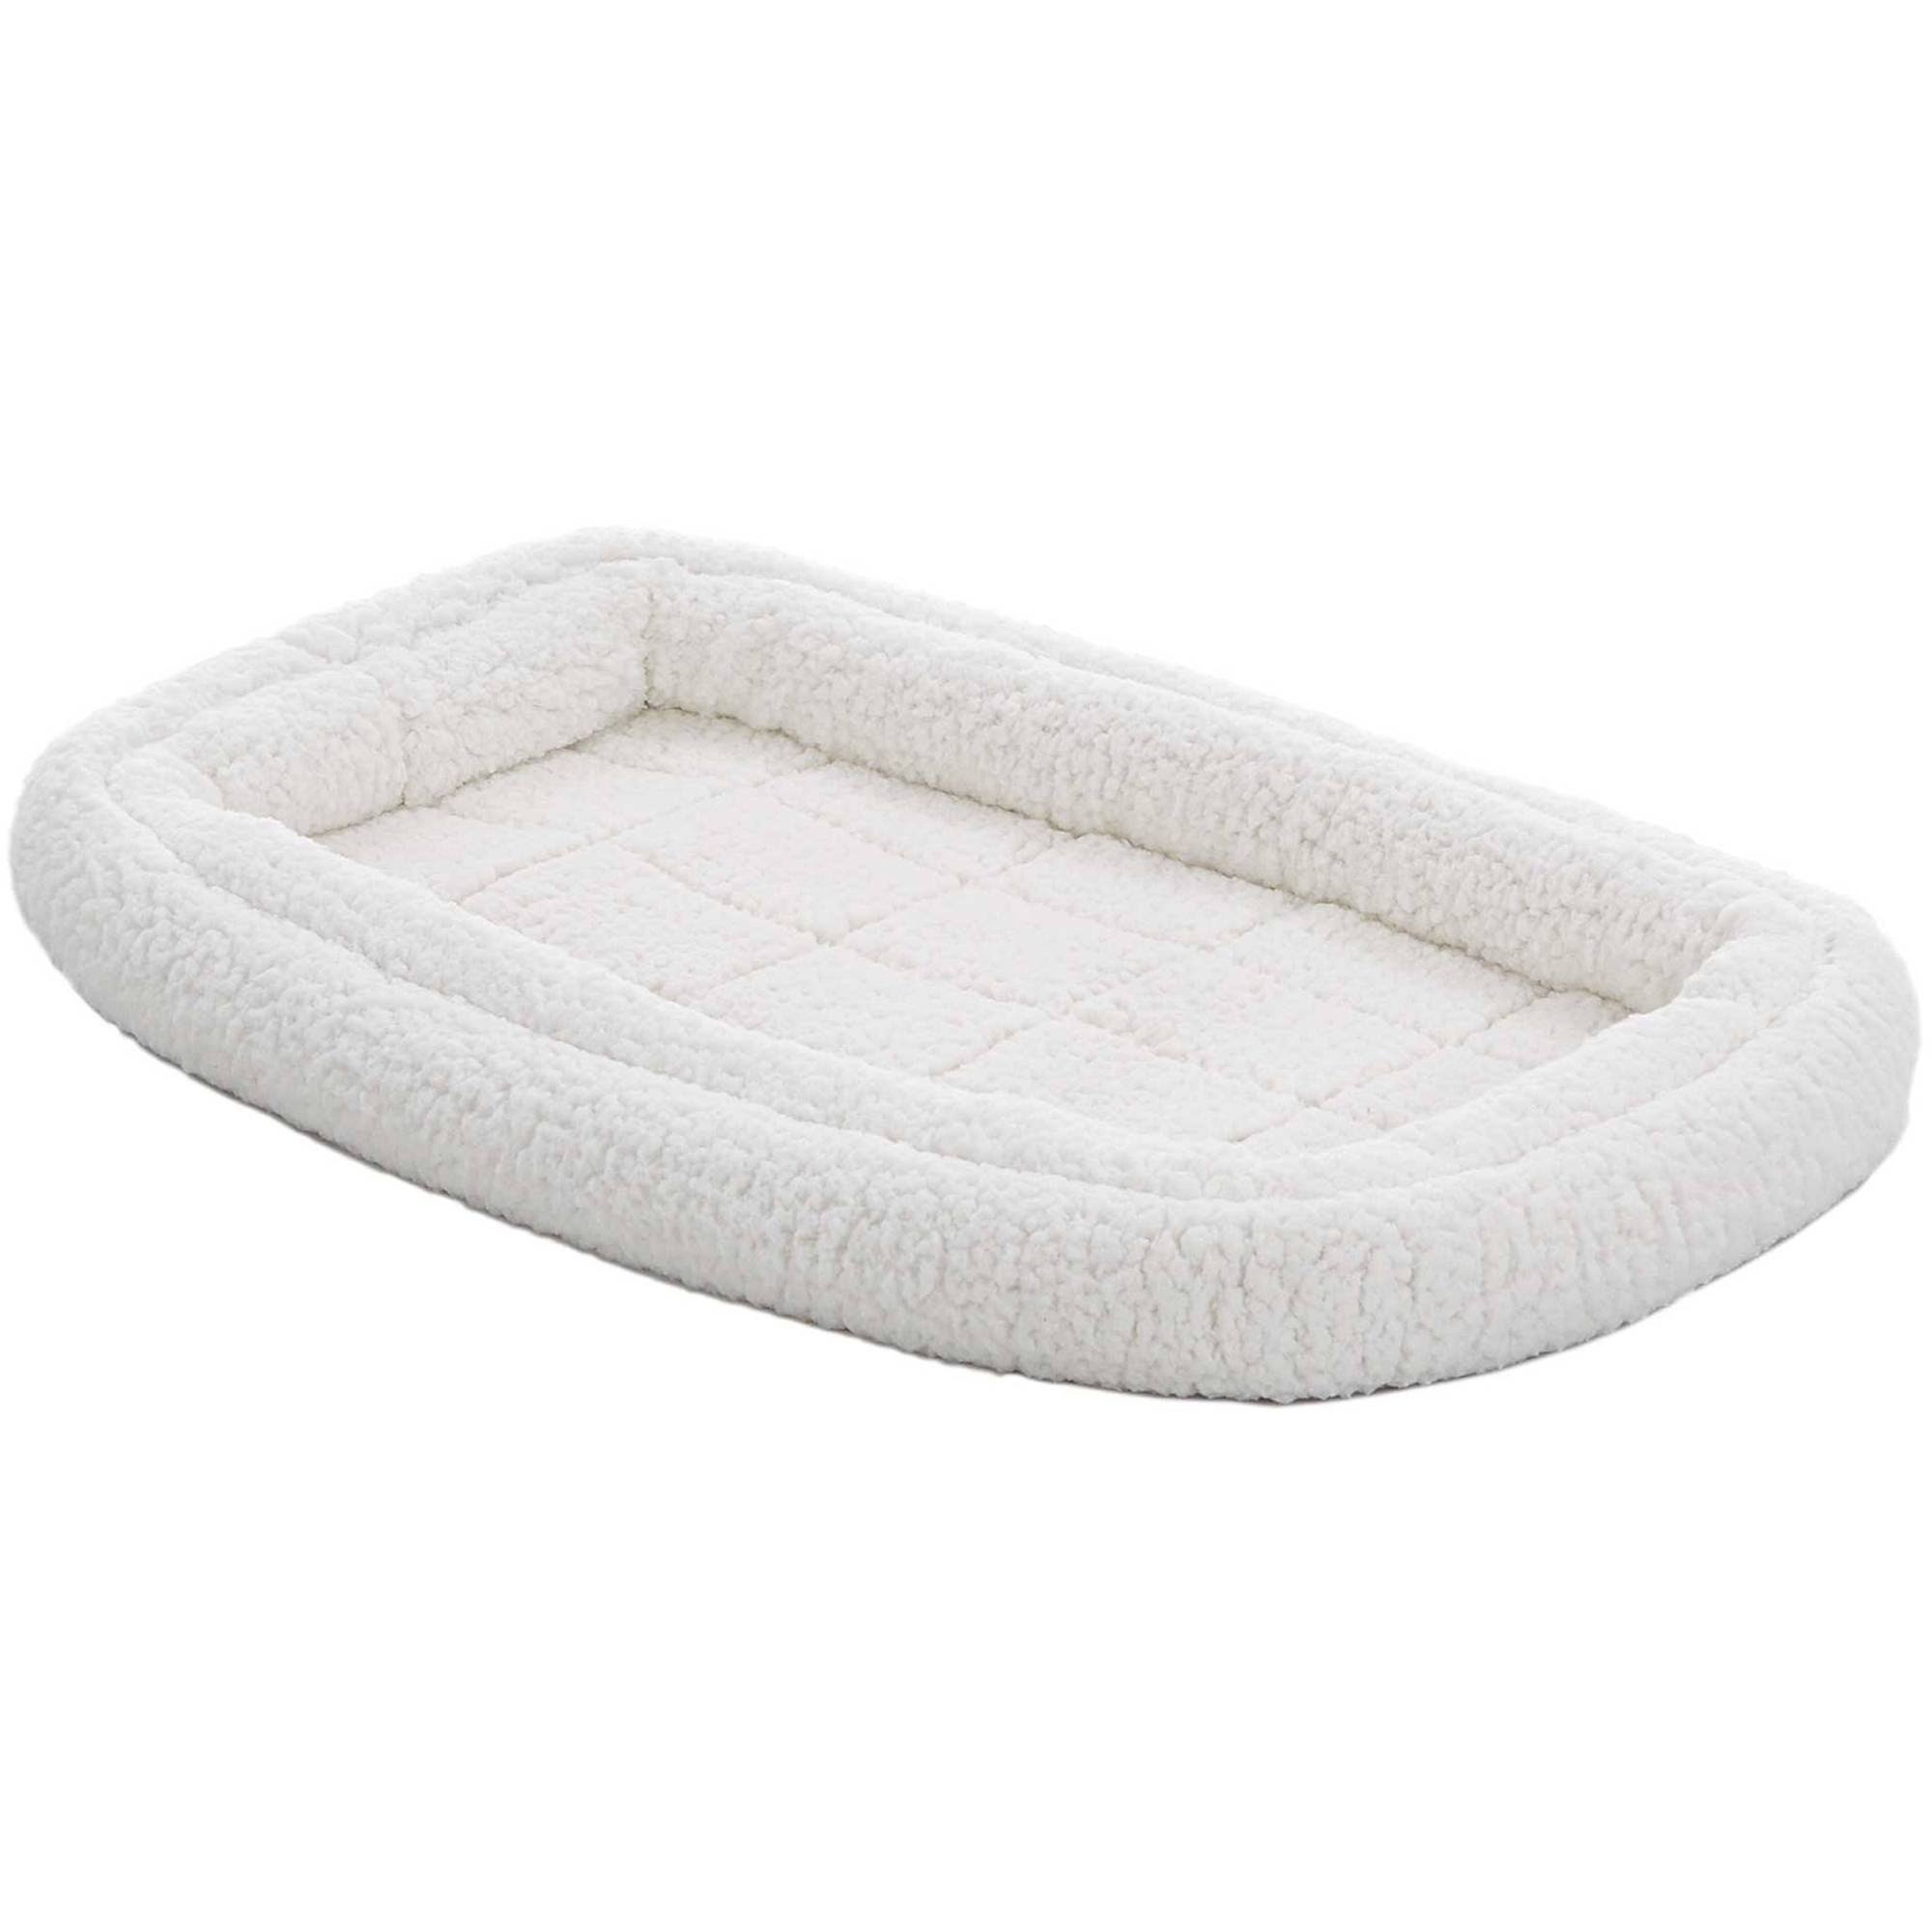 Midwest Quiet Time Deluxe Double Bolster Dog Bed - White